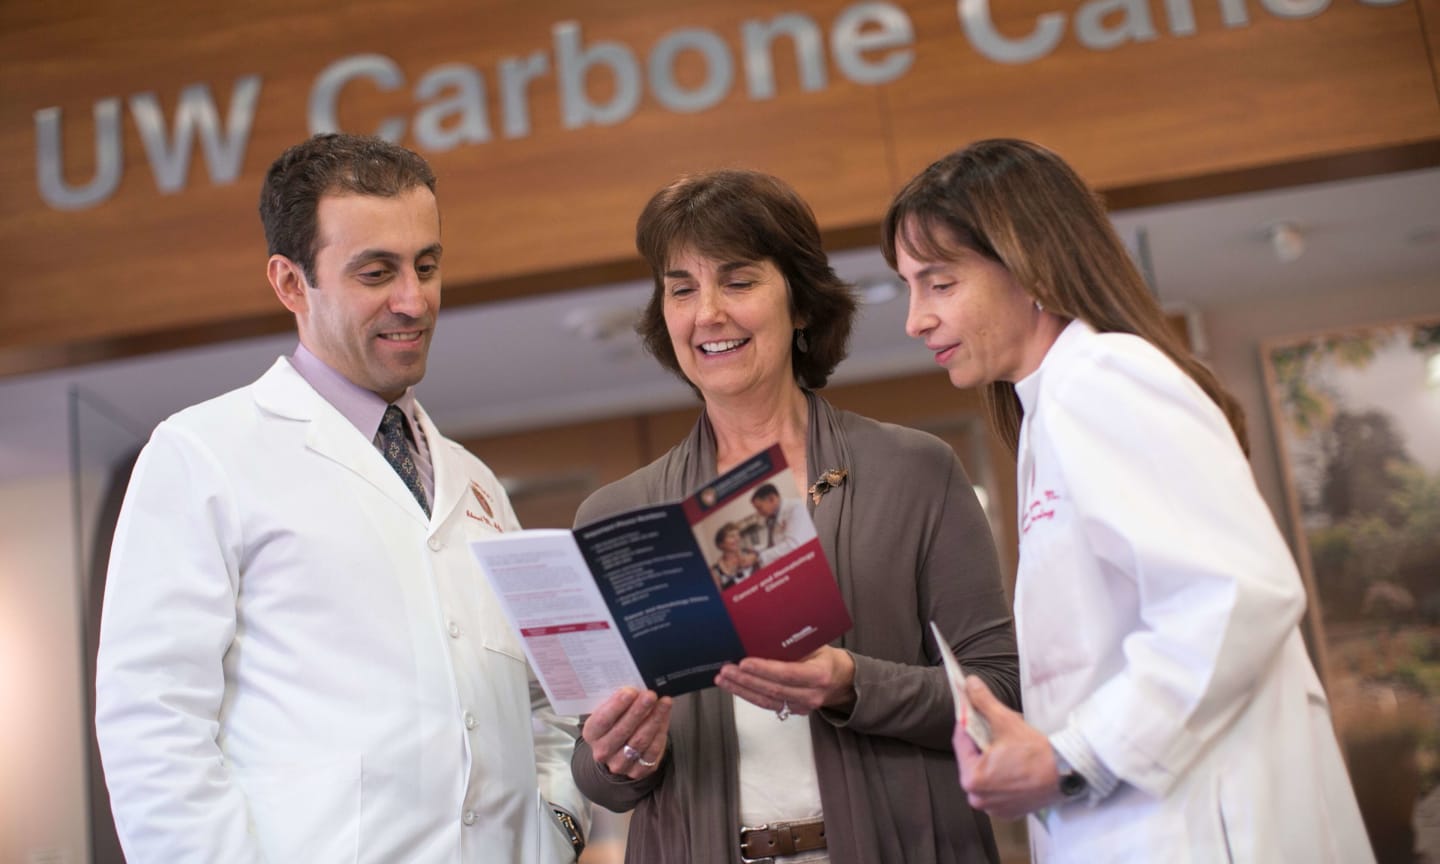 Jane DeShaw reading a pamphlet next to two doctors in front of a UW Carbon Cancer Center sign